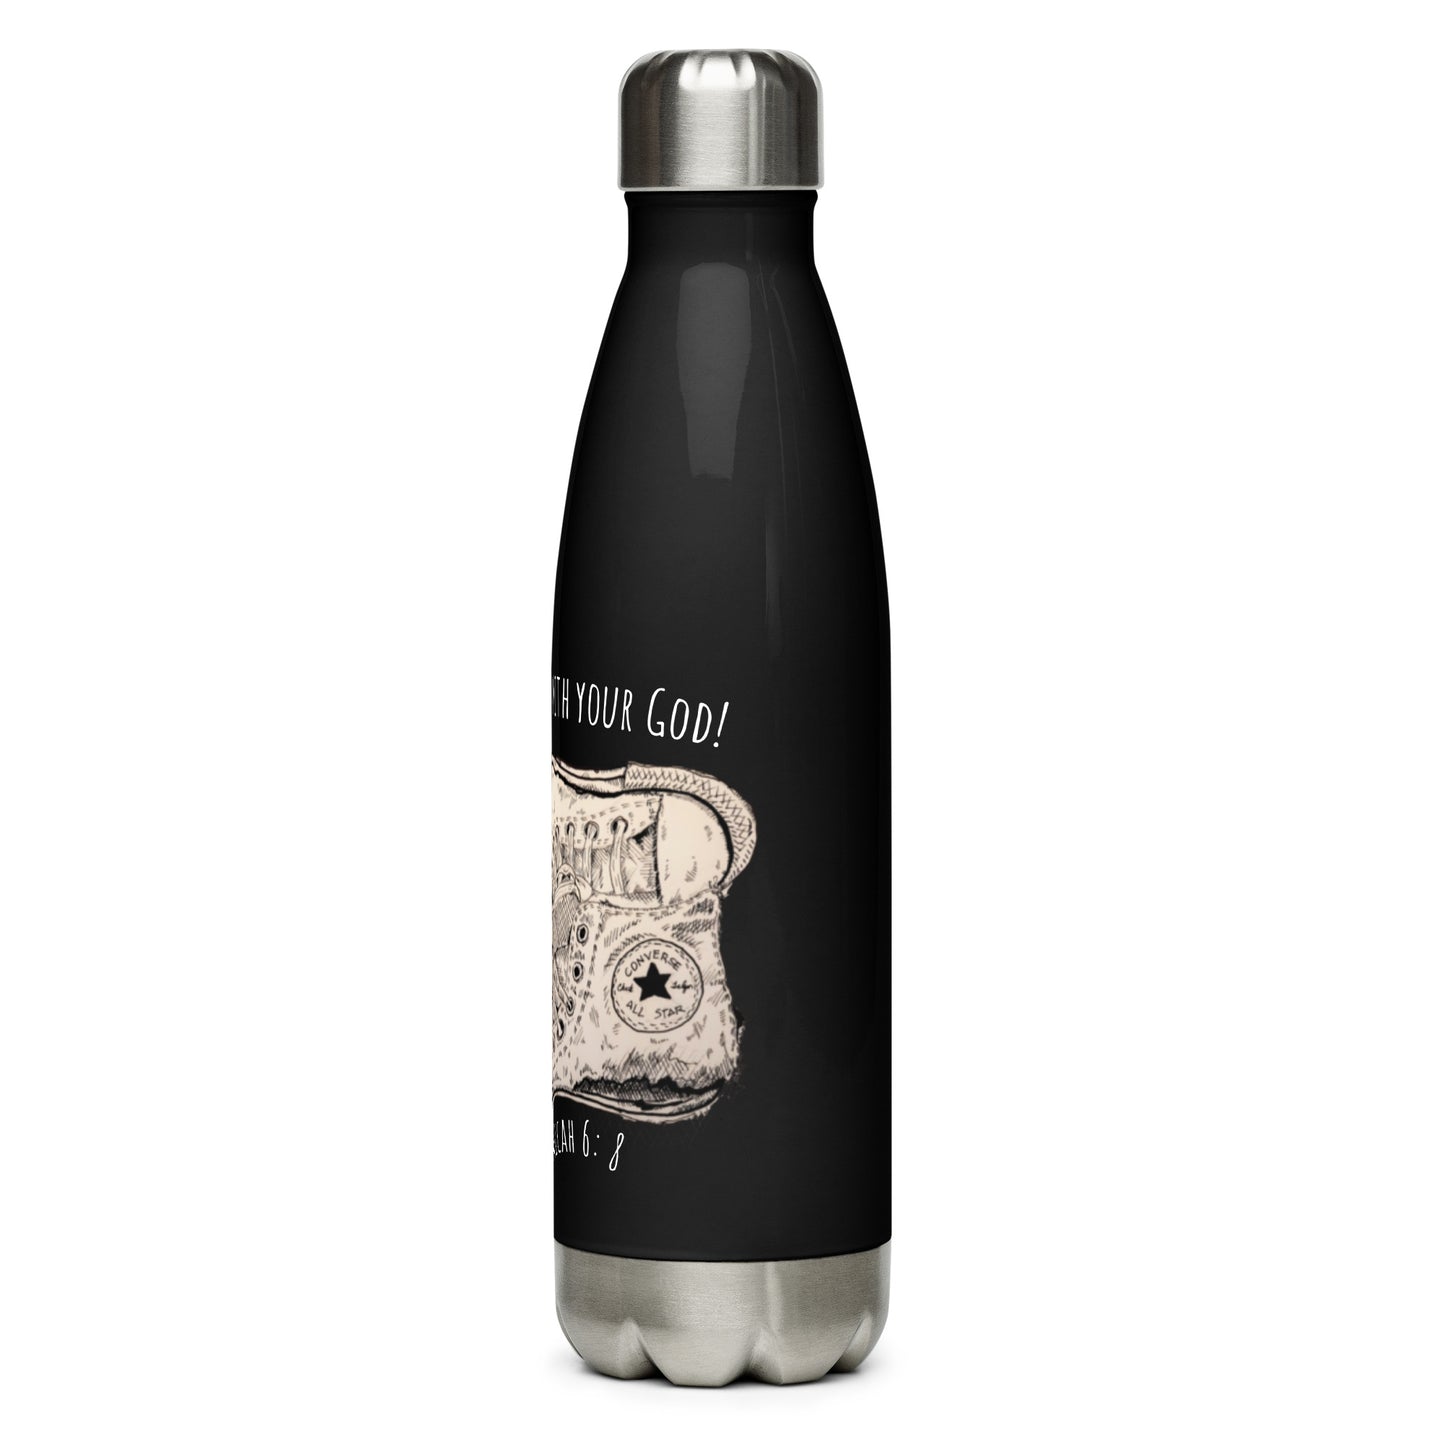 God Said "Walk Humbly" Stainless steel water bottle